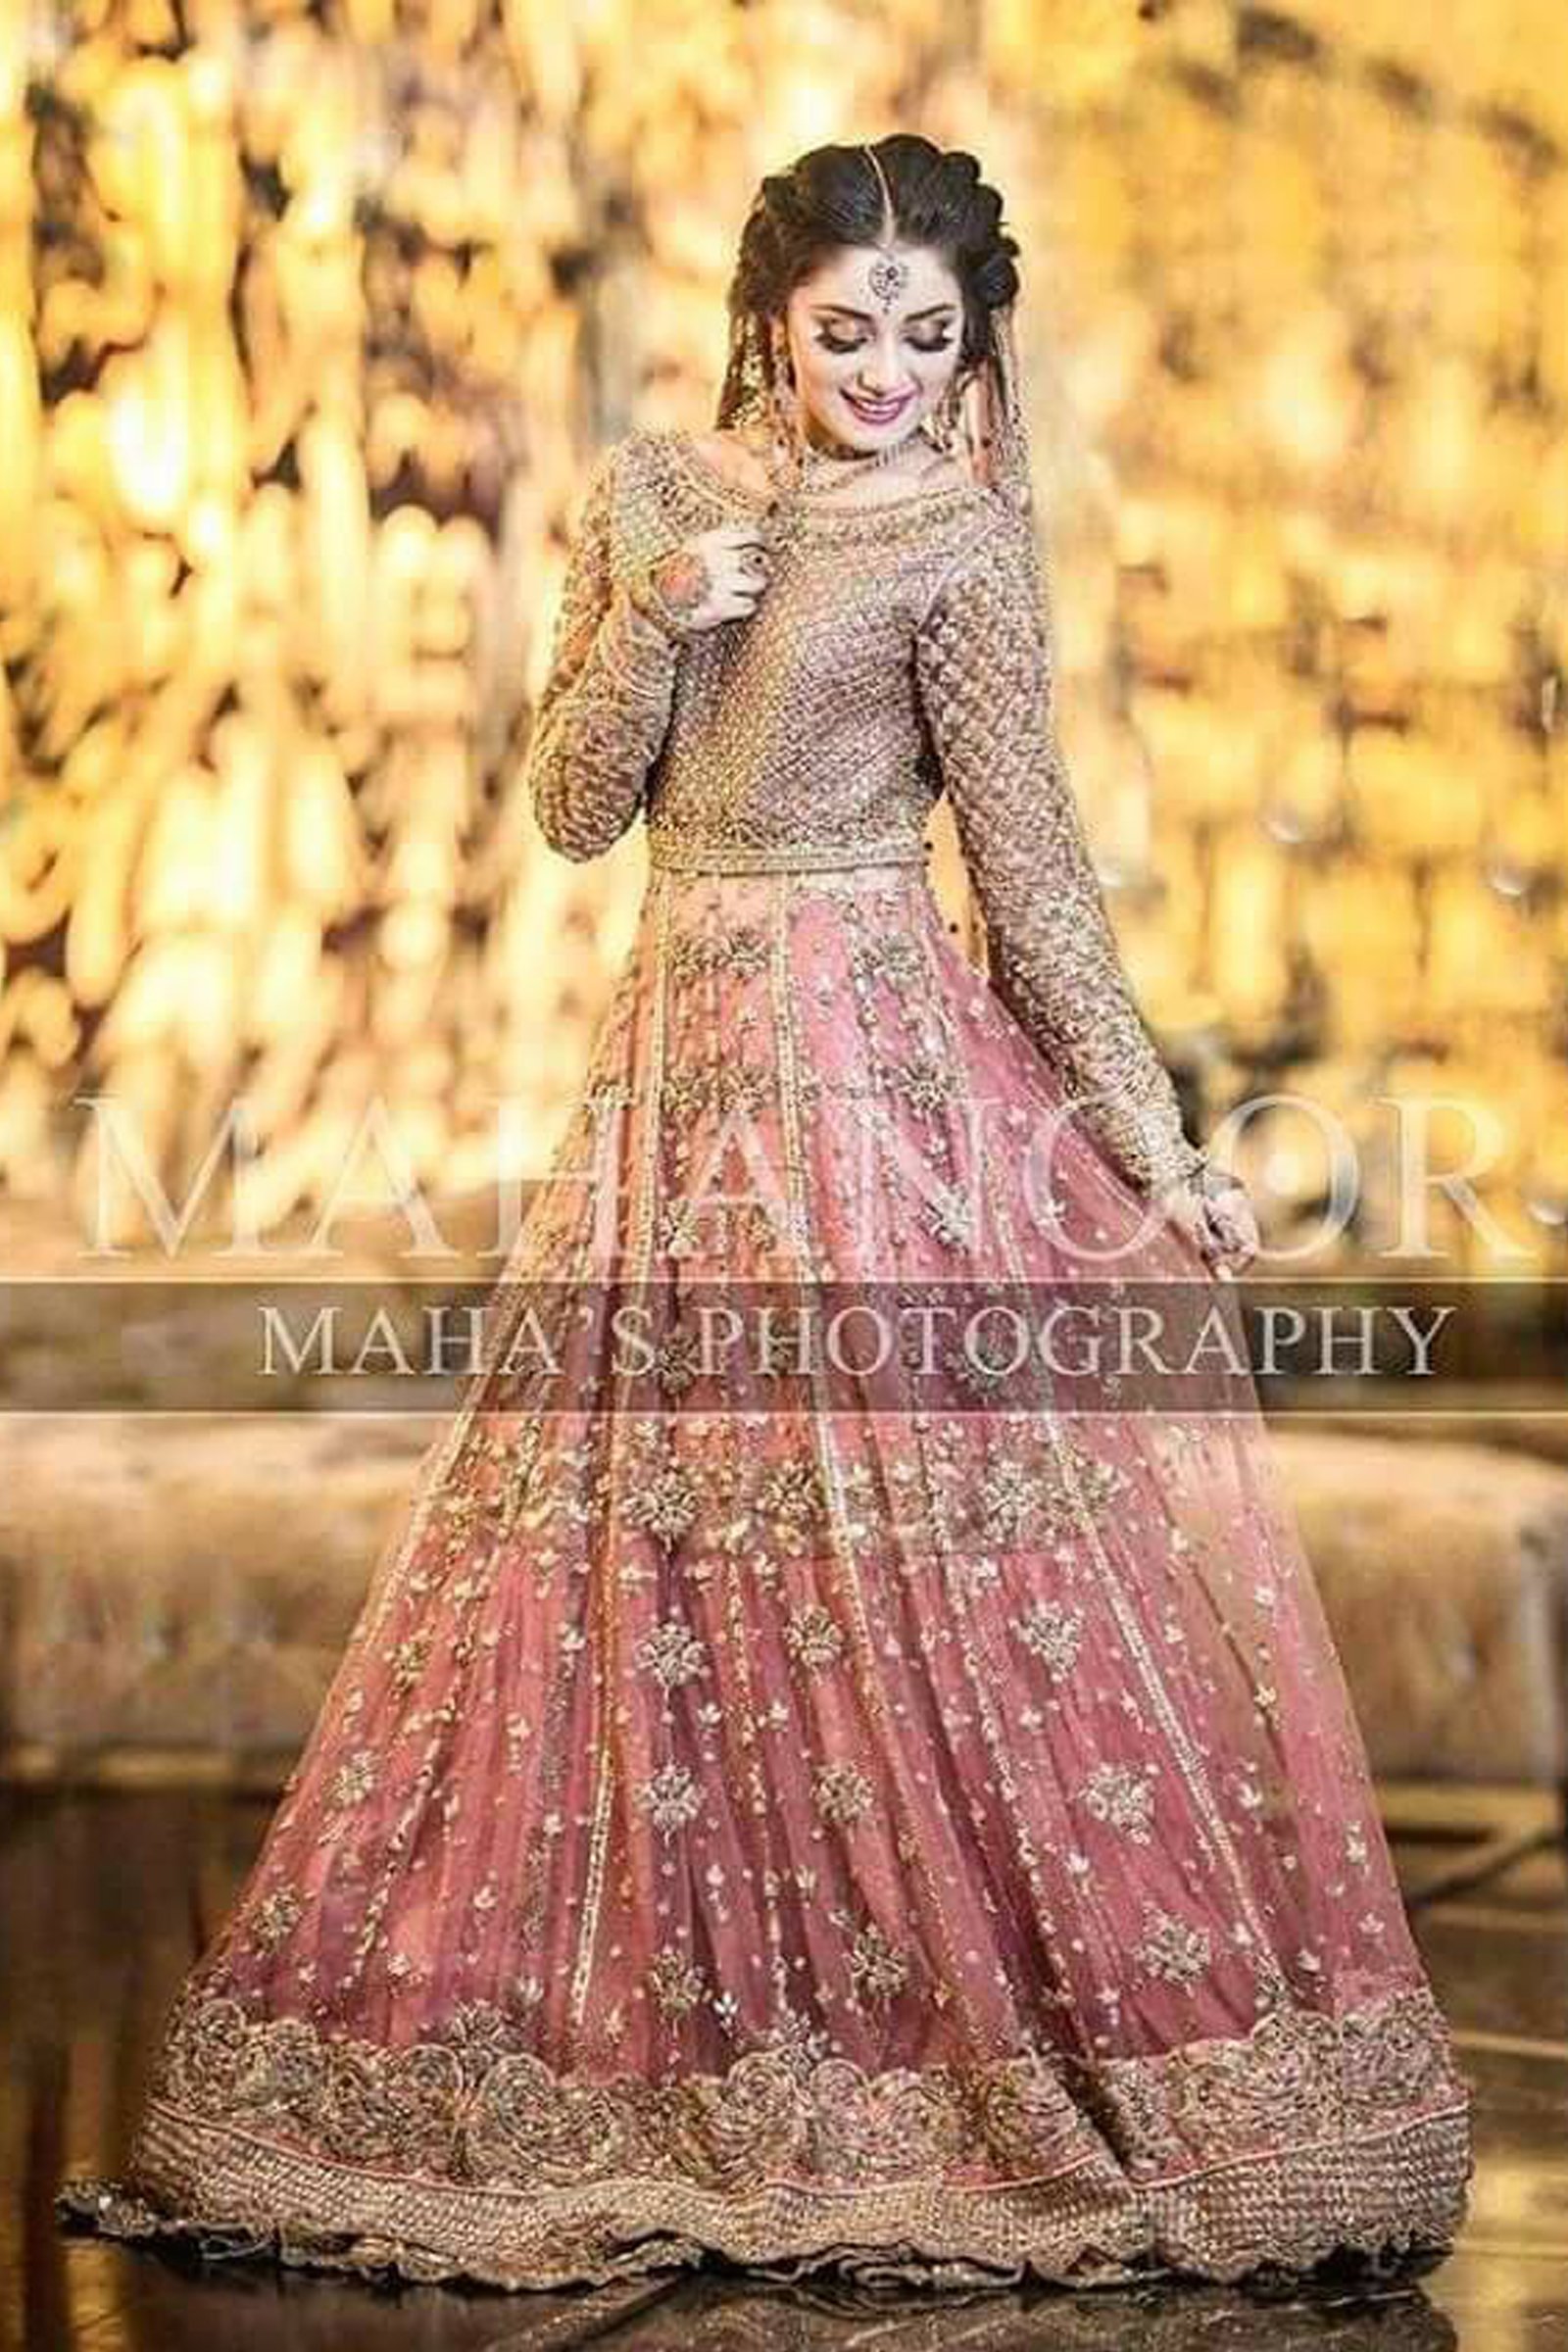 bridal dresses pakistani 2018 in red colour